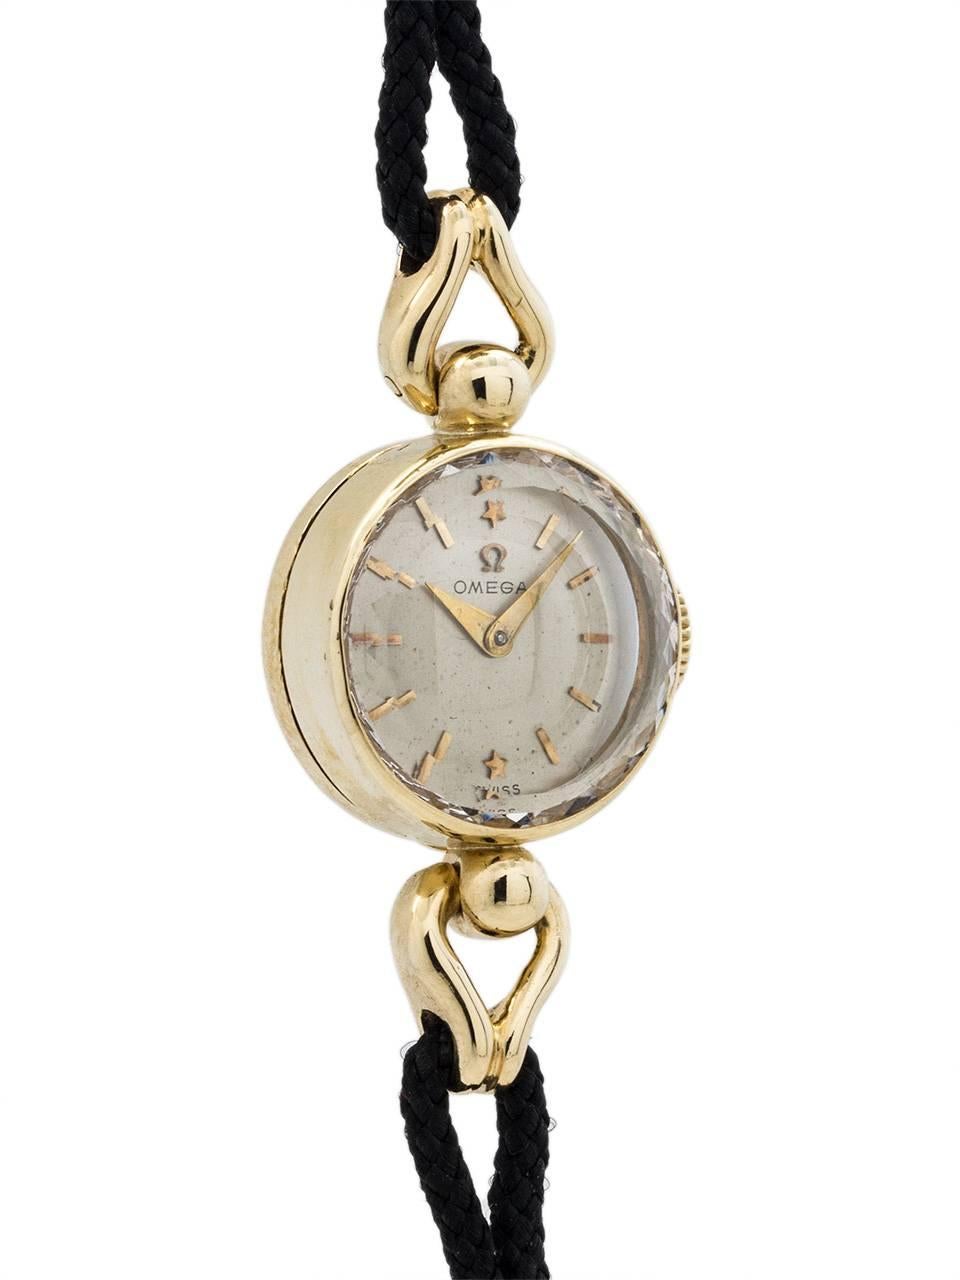 Modern Omega Ladies Yellow Gold Manual Wind Wristwatch, circa 1950s For Sale